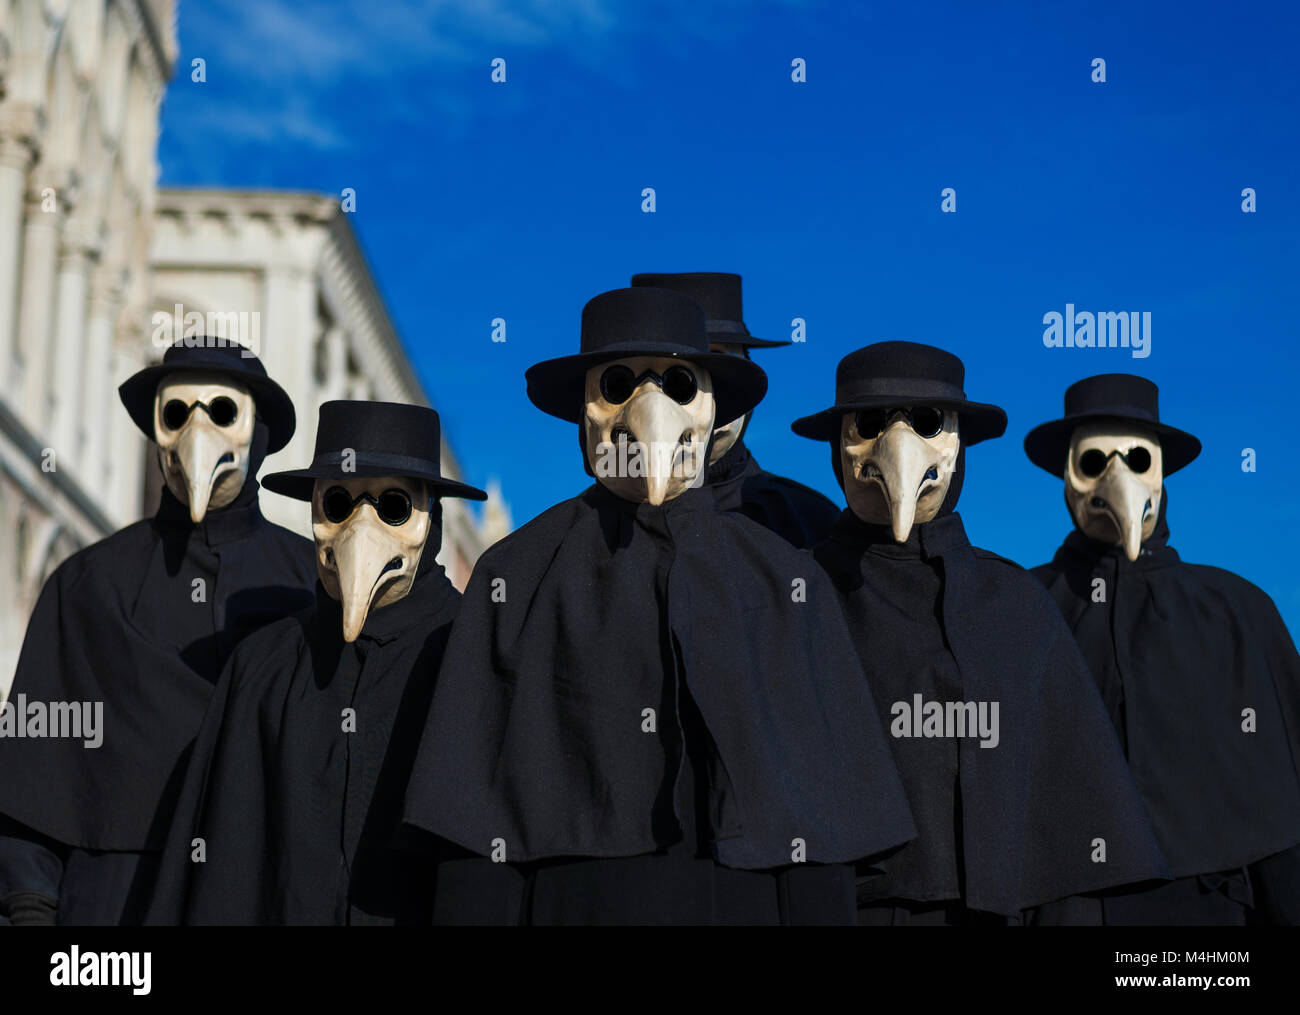 Plague Doctor Masks group, traditional costume invented in the 17th century and historical character of Venice Carnival Stock Photo